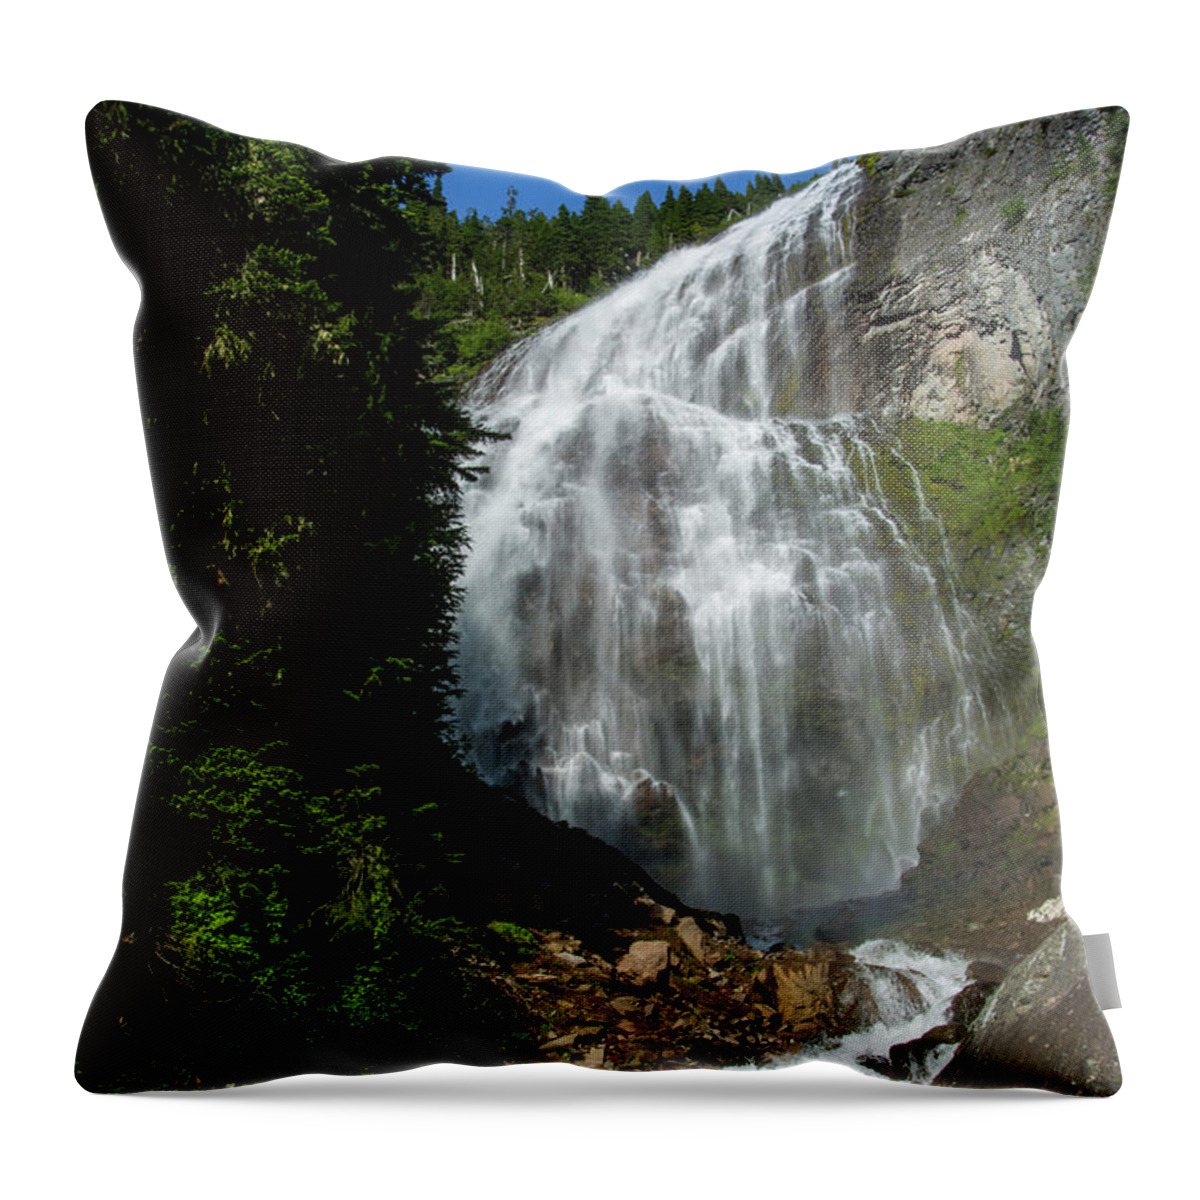 Majestic Throw Pillow featuring the photograph Spray Falls by Pelo Blanco Photo